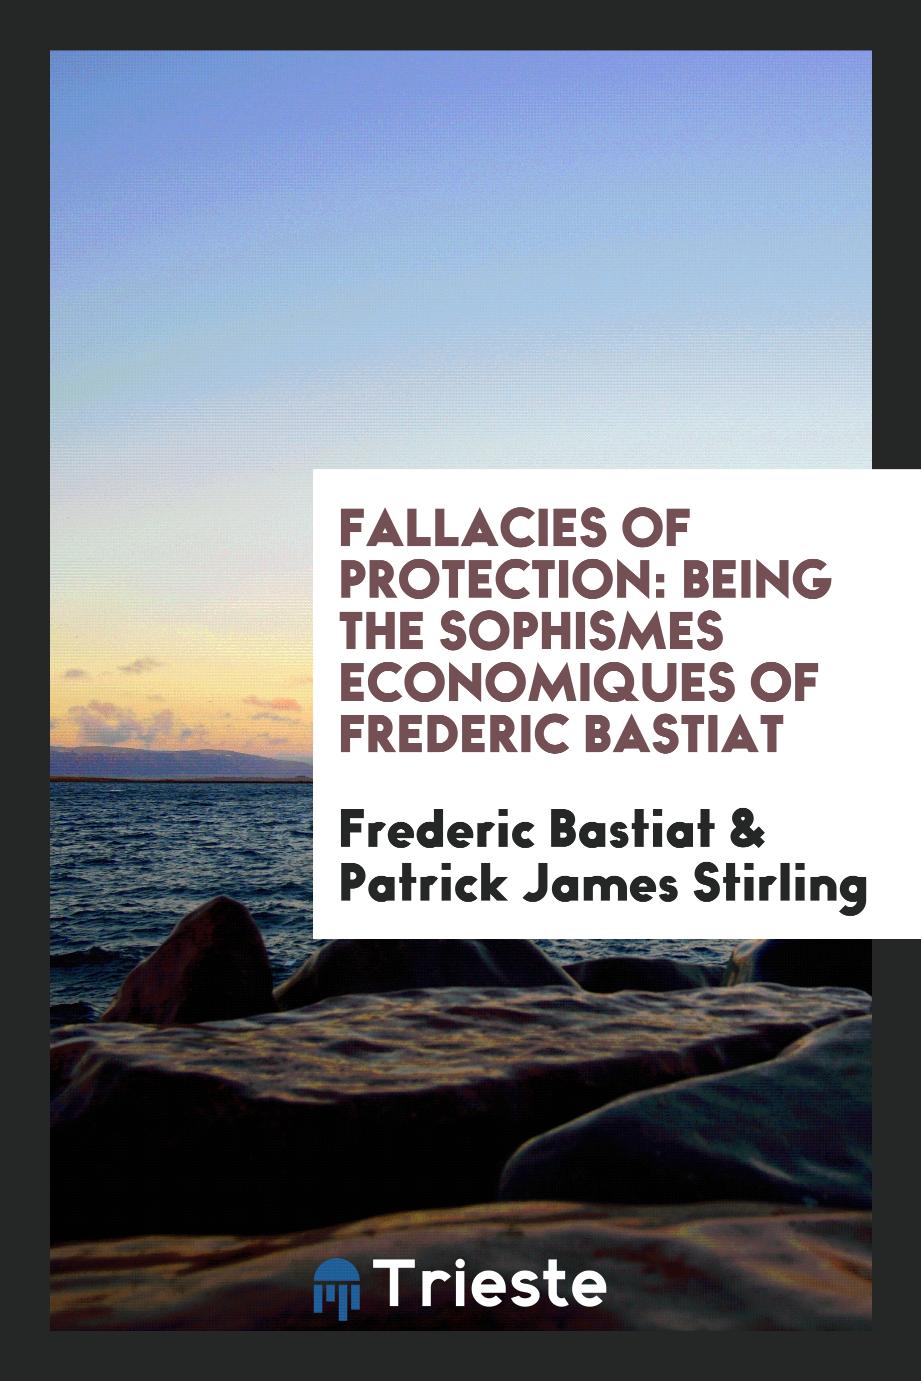 Fallacies of Protection: Being the Sophismes Economiques of Frederic Bastiat